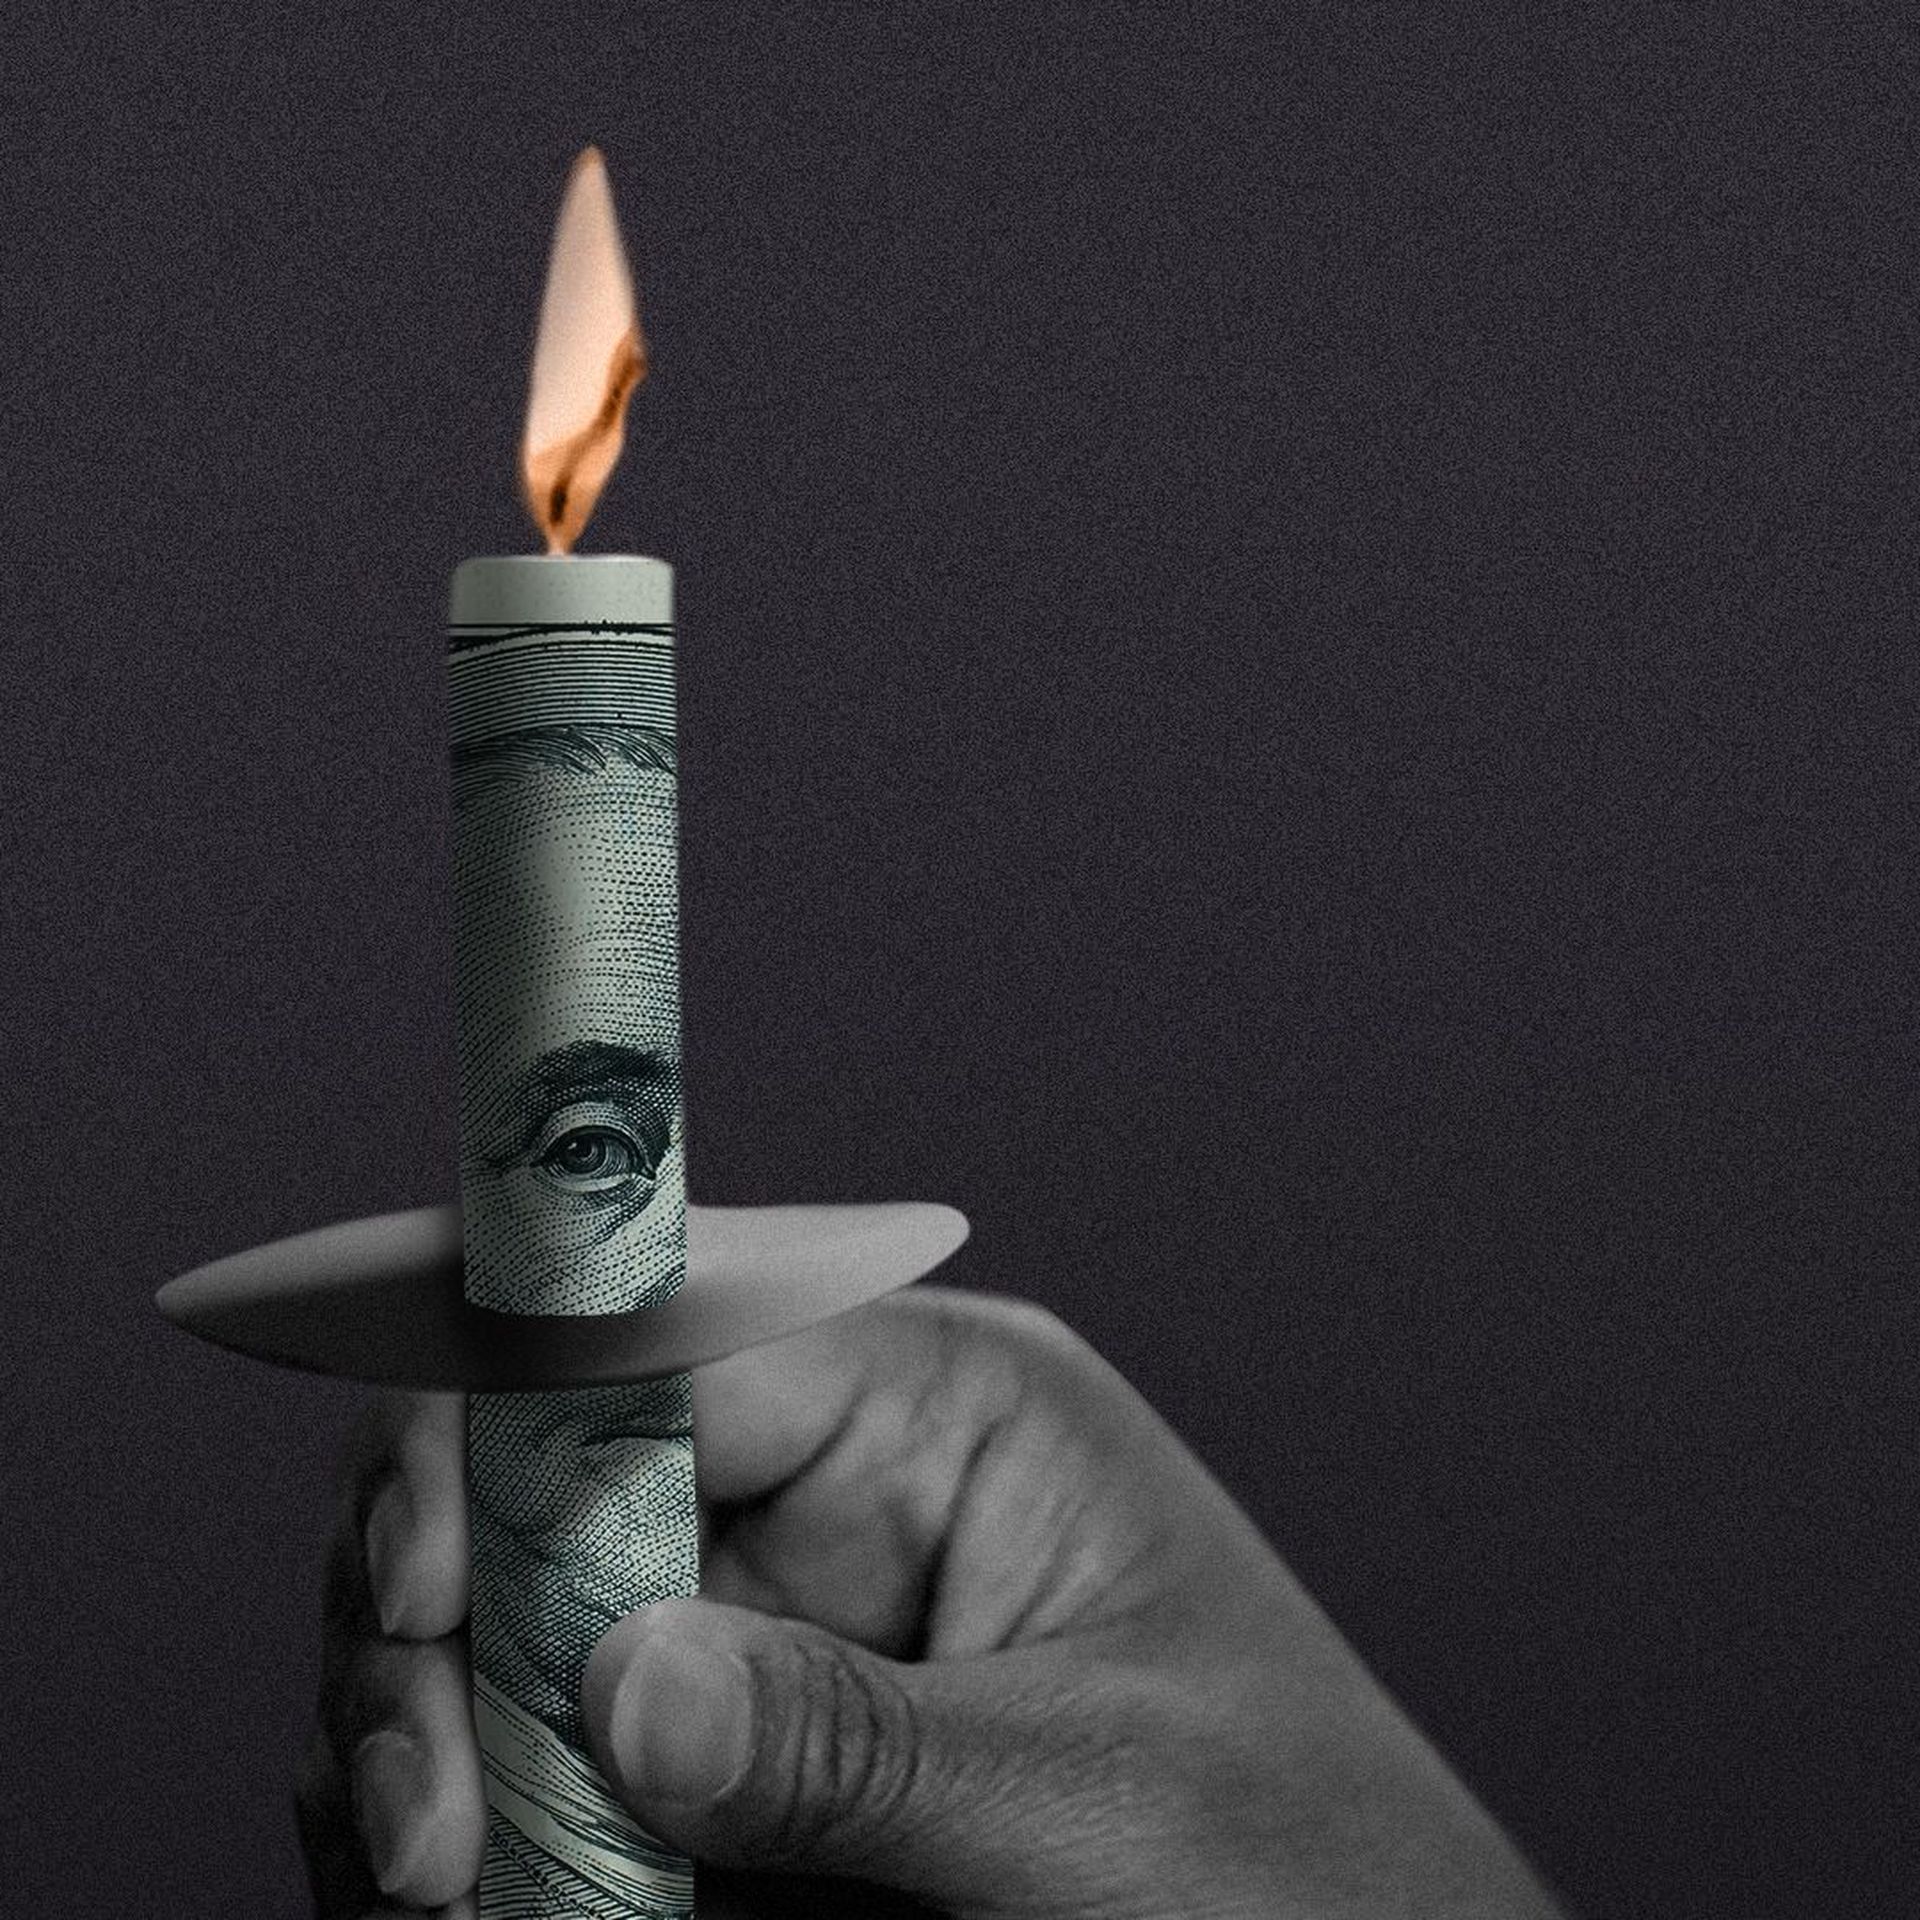 Illustration of a hand at a vigil holding a candle wrapped in a $100 bill.